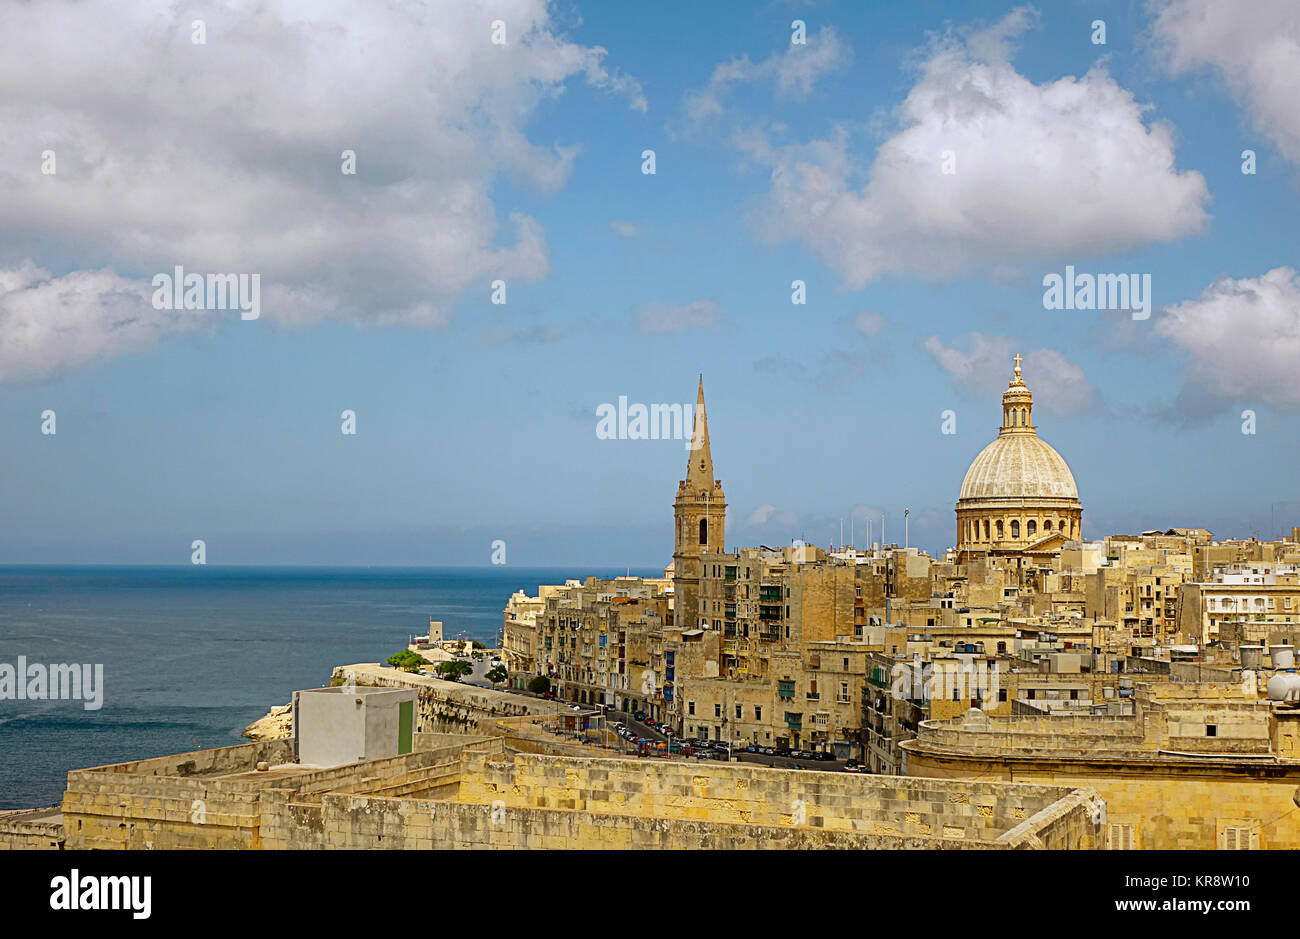 the golden city over the wide sea Stock Photo